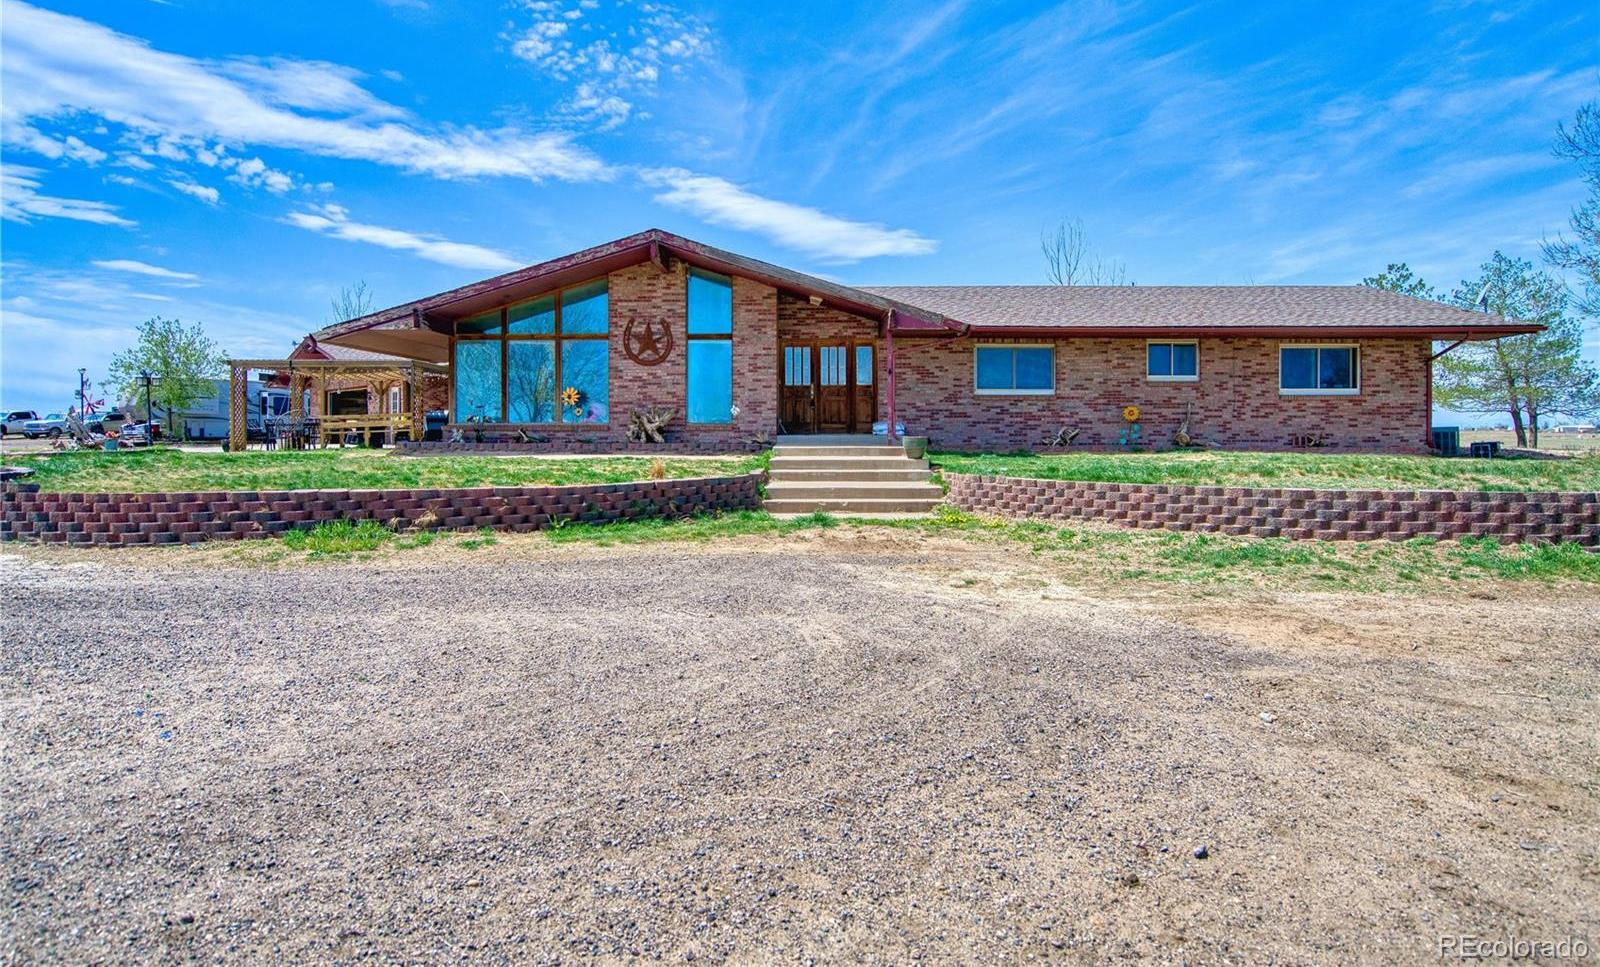 Photo one of 18978 County Road 22 Fort Lupton CO 80621 | MLS 5885350